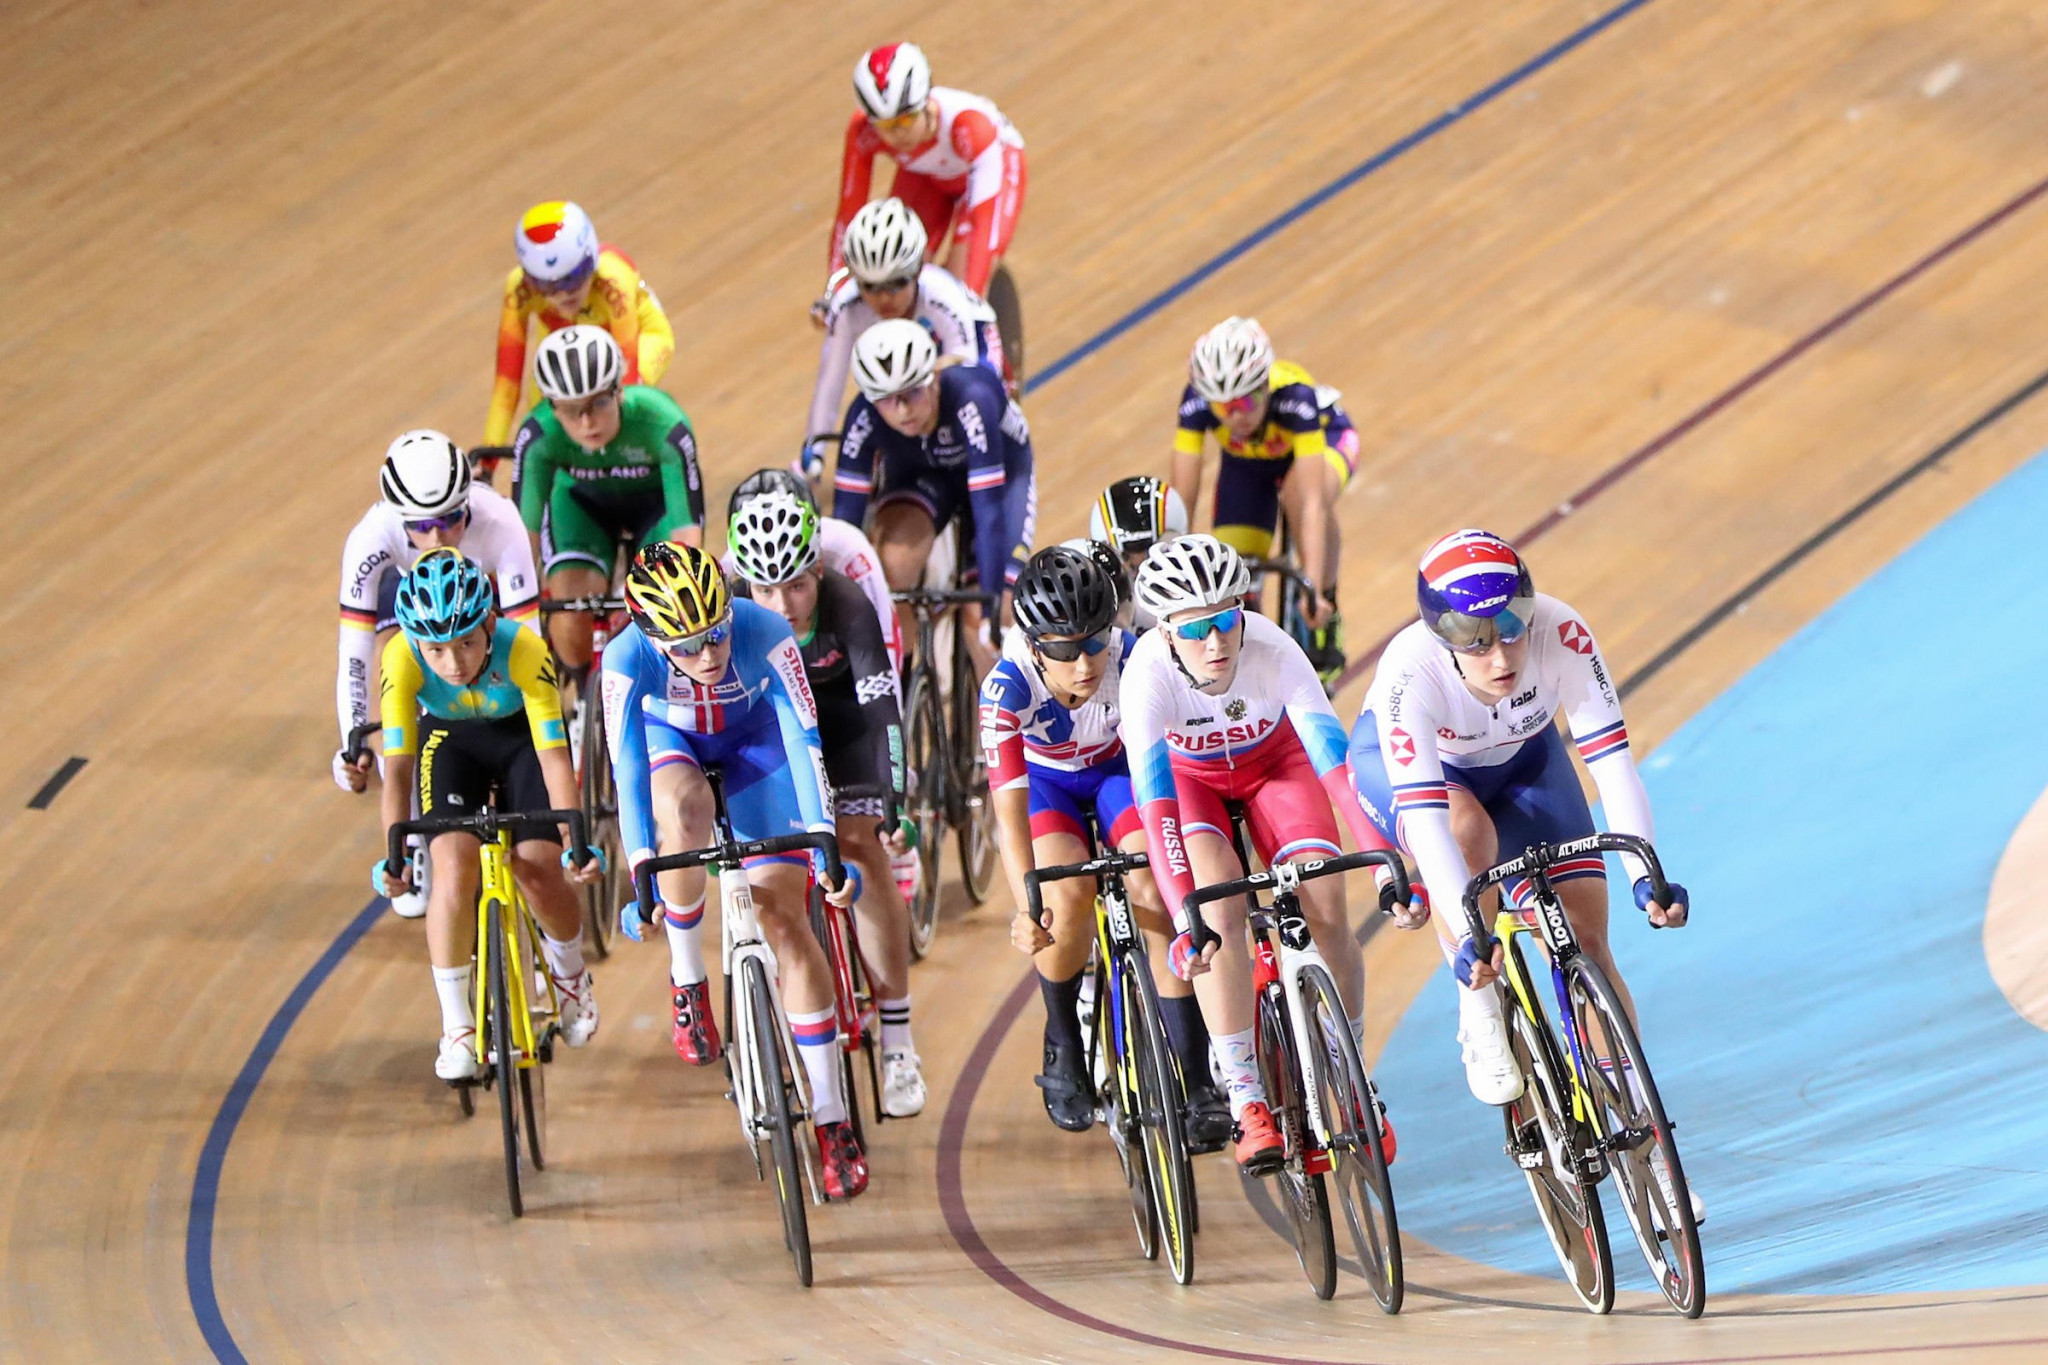 Australian Ella Sibley won the first individual title of the event in Frankfurt ©UCI